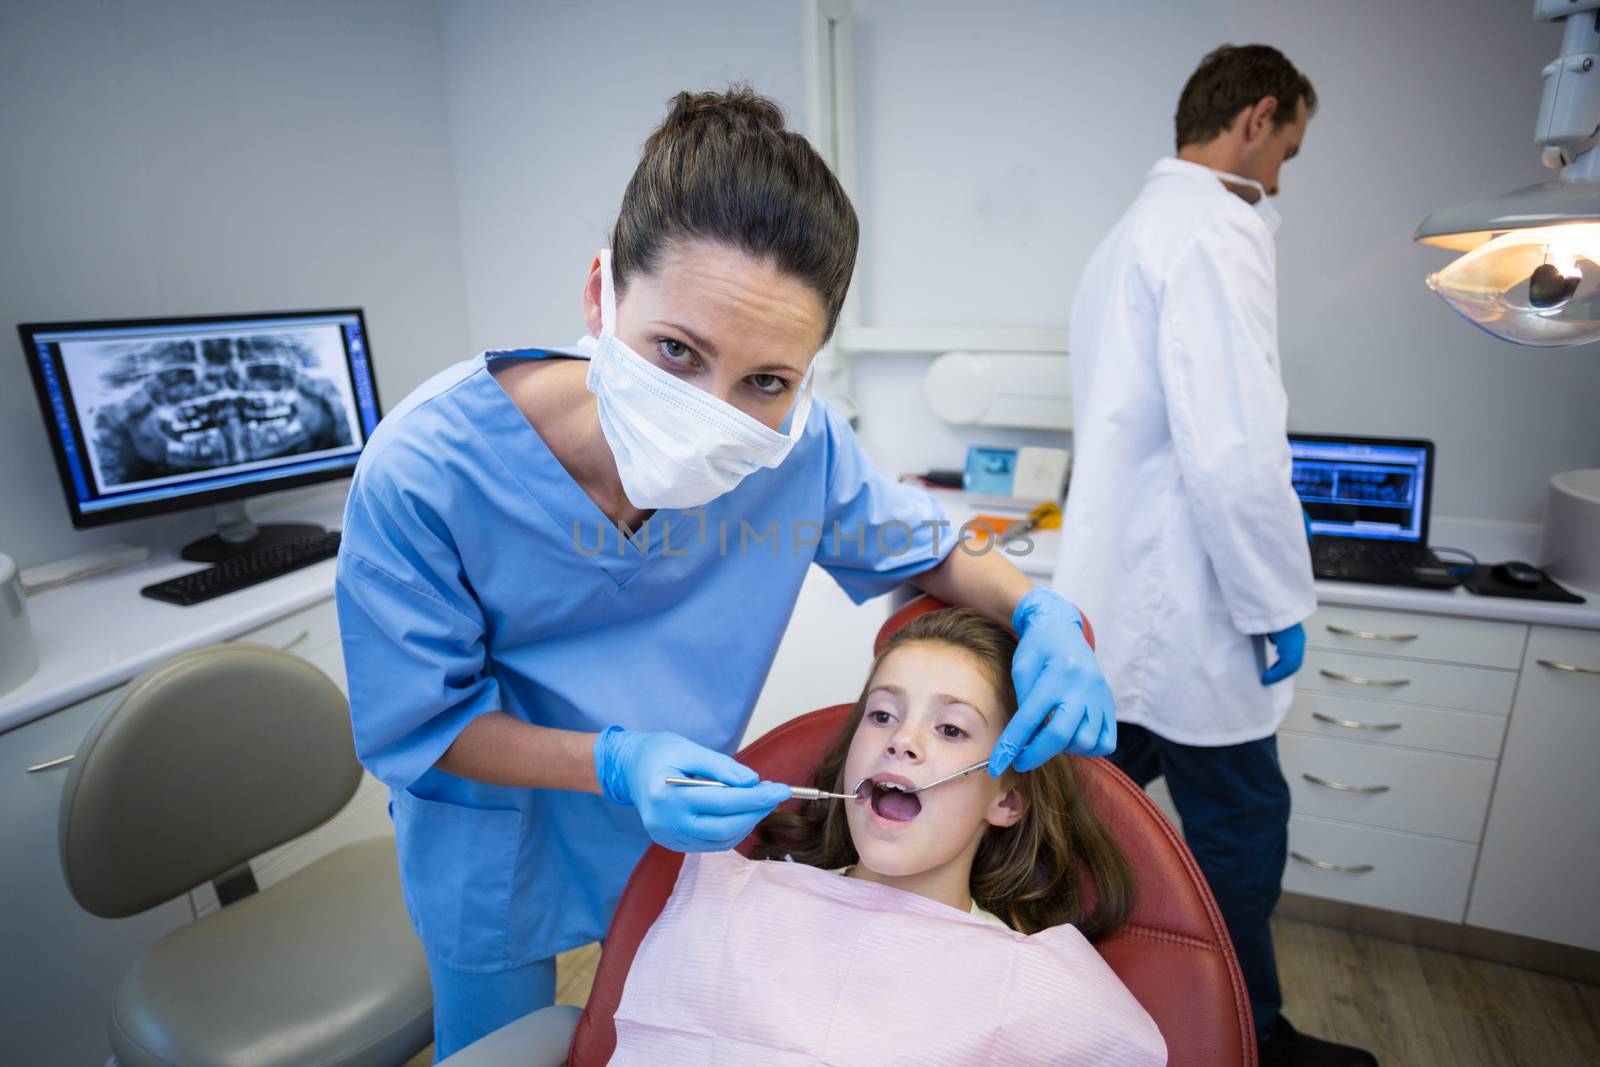 Dentist examining a young patient with tools by Wavebreakmedia